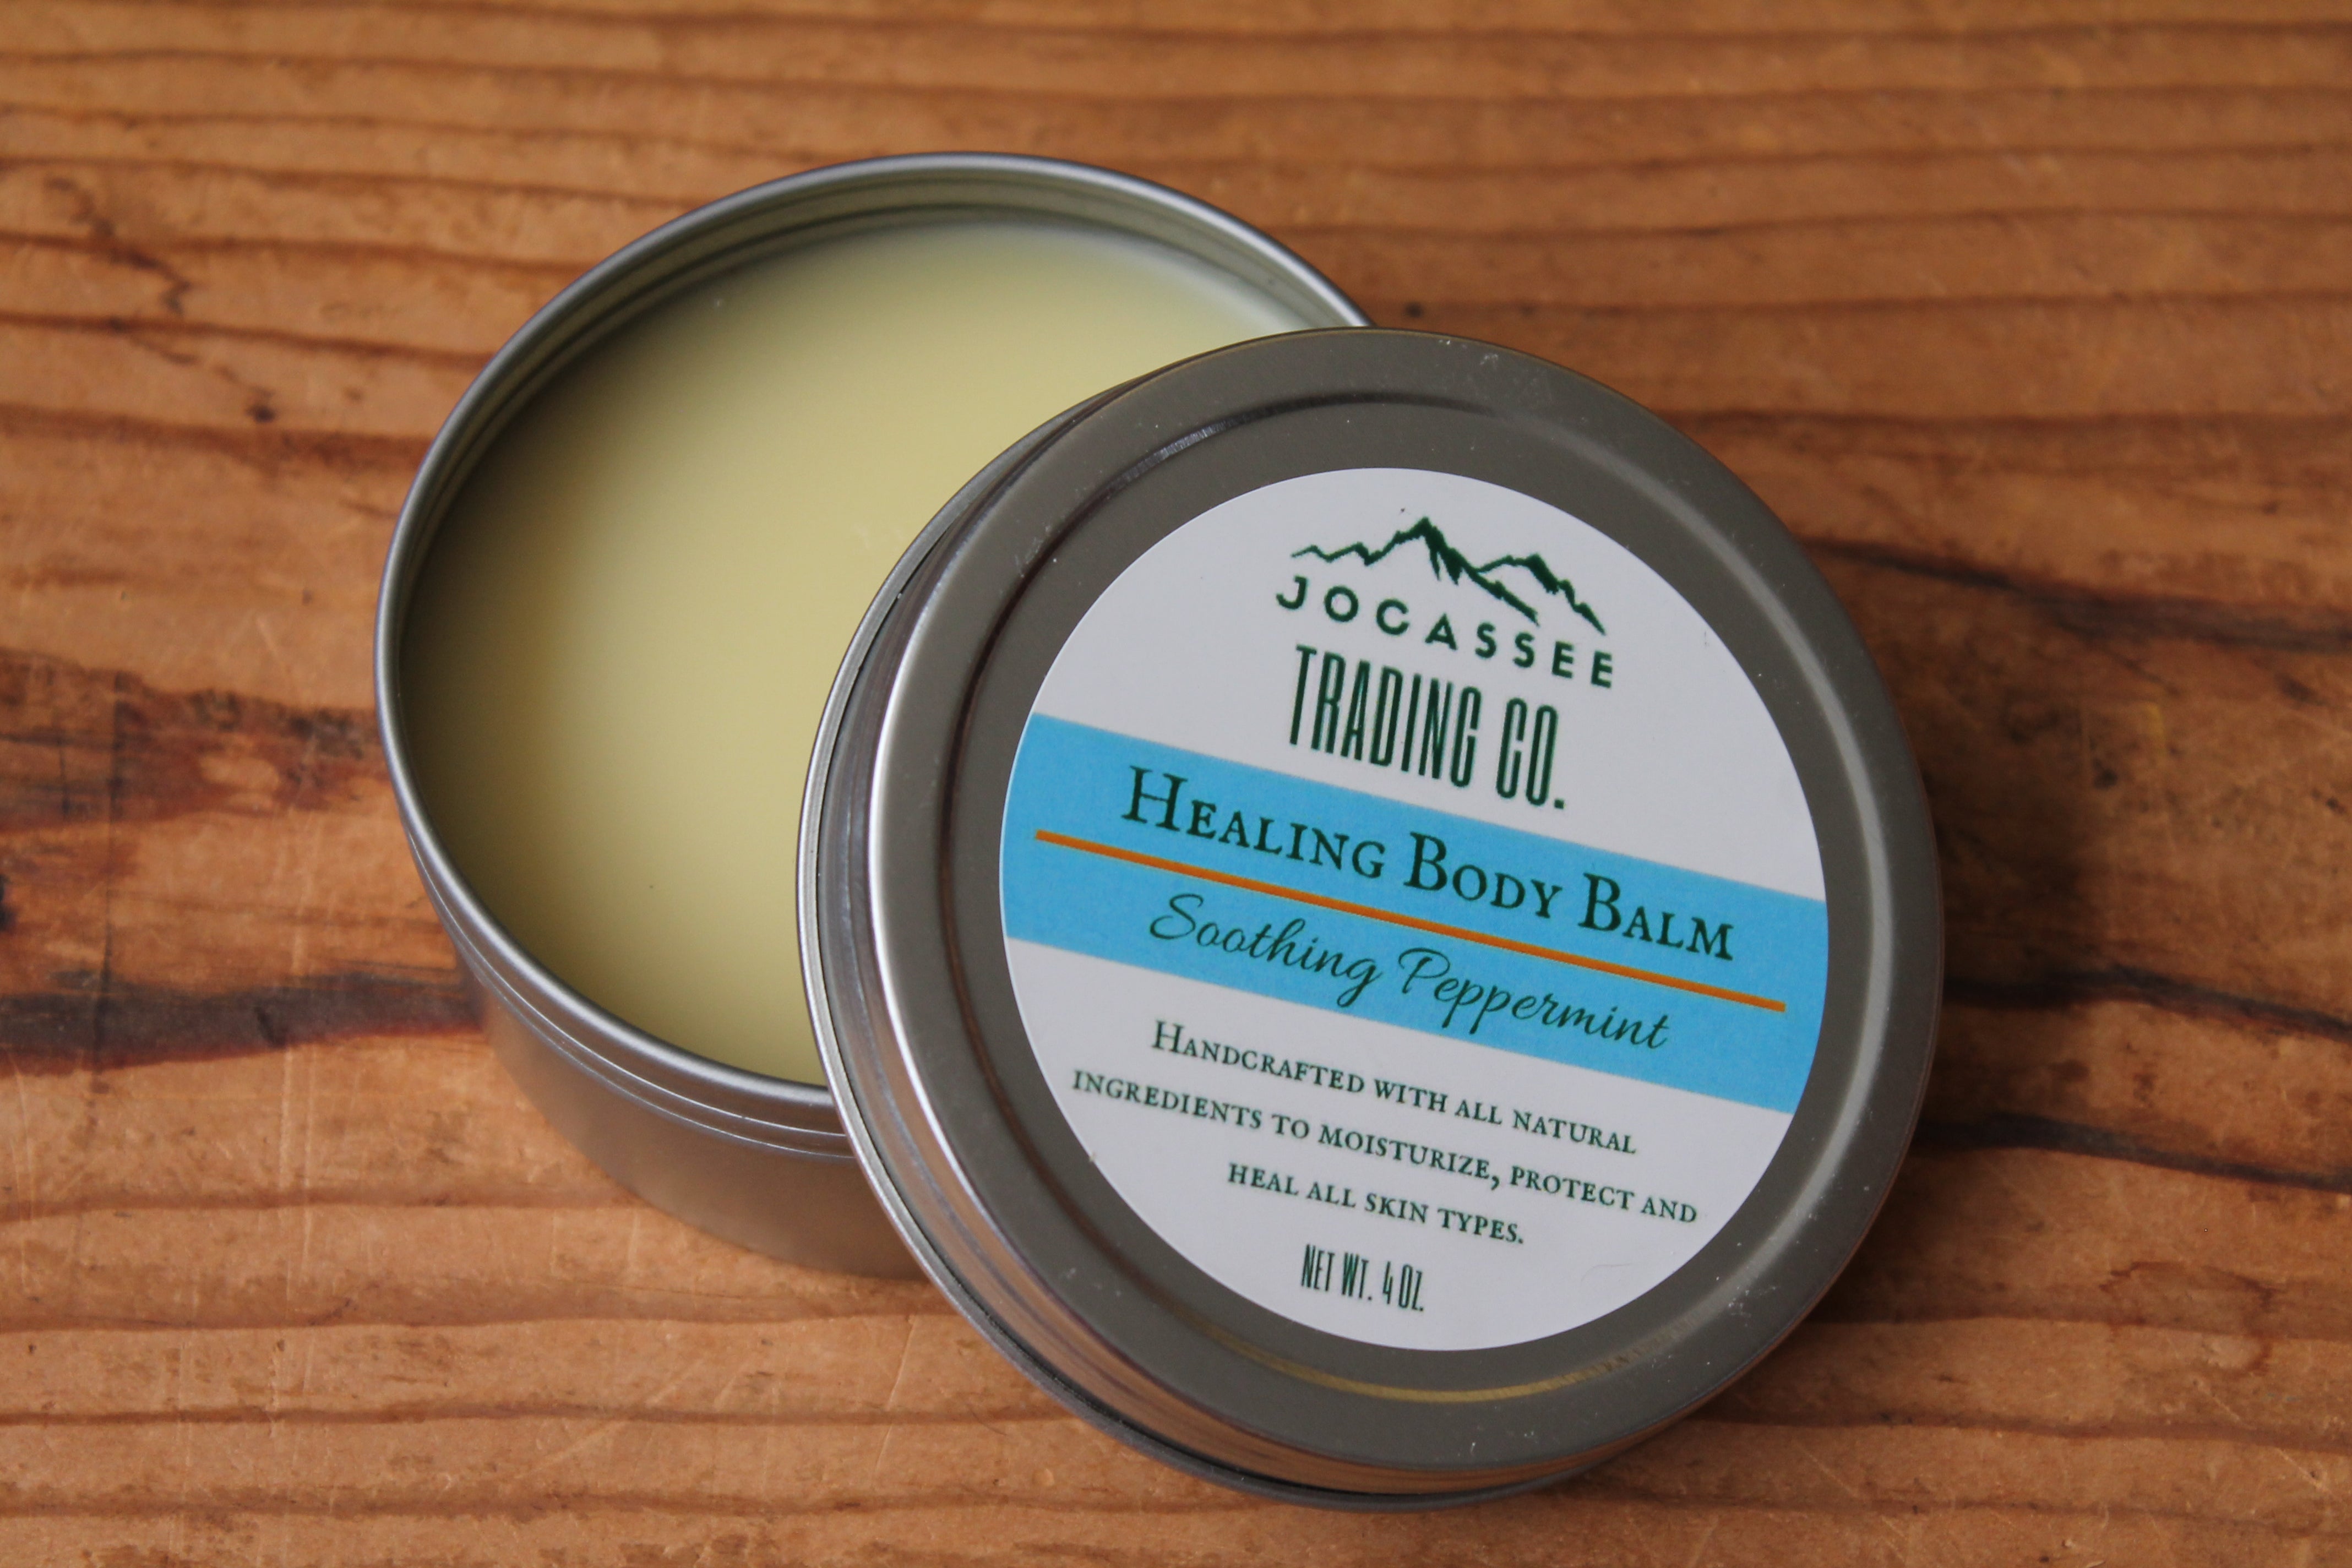 Healing Body Balm - Soothing Peppermint